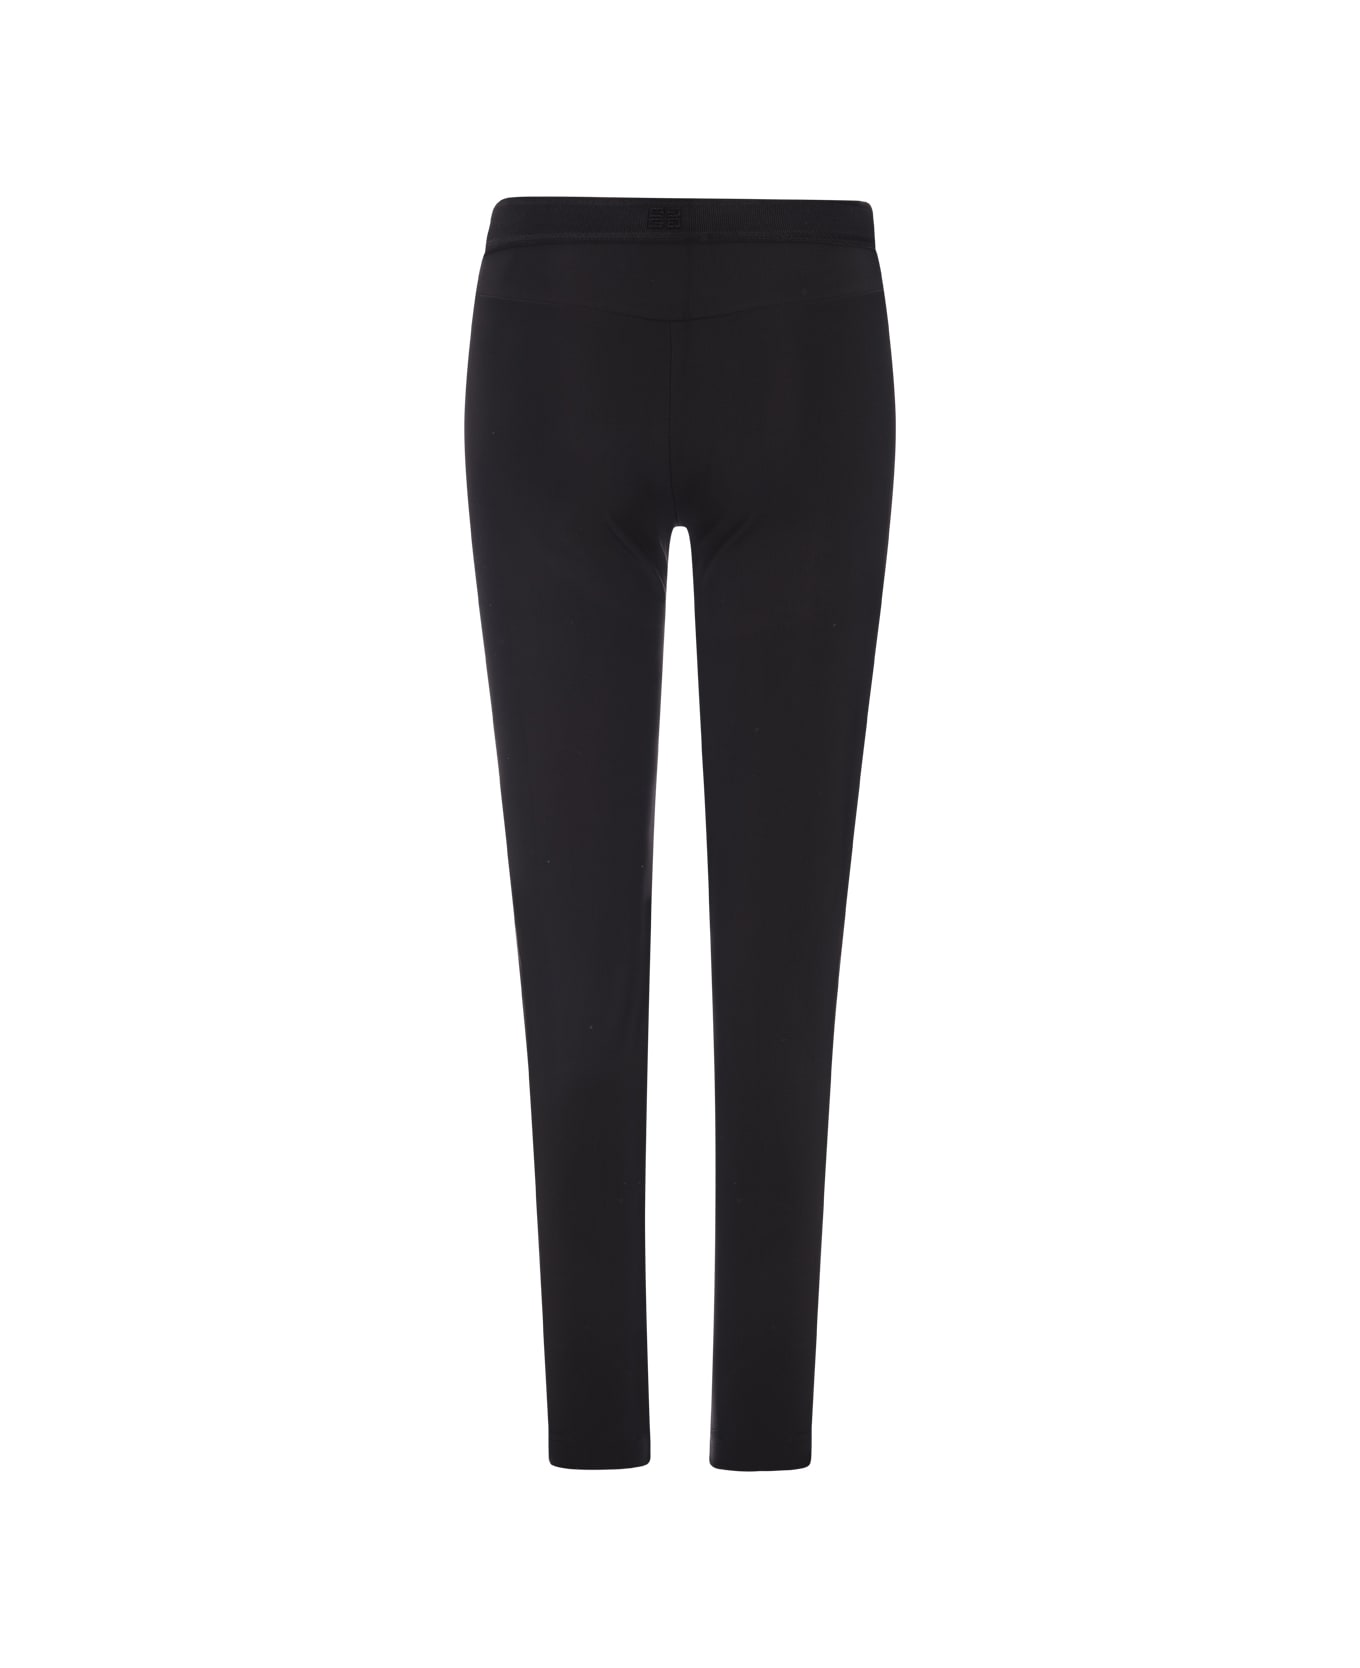 Givenchy Black Jersey Leggings With Givenchy Belt - Black レギンス